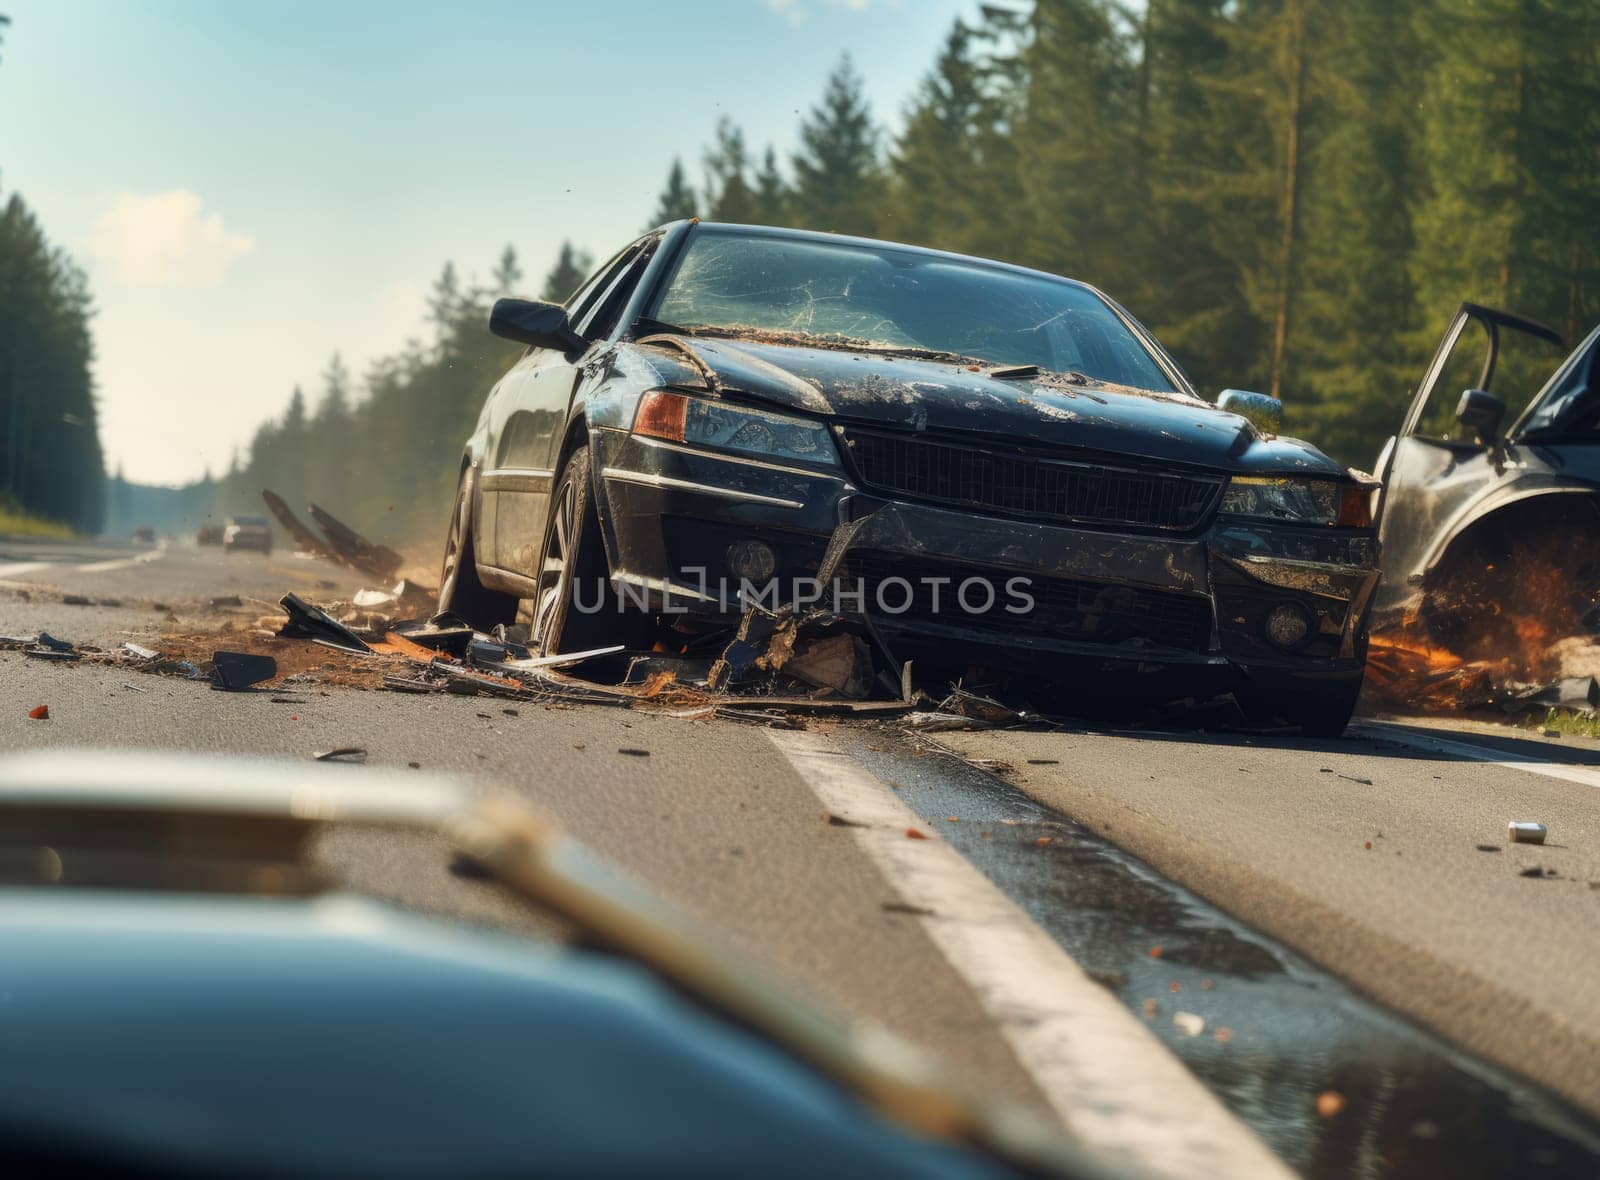 Scene of a severe car collision, with a heavily damaged vehicle and debris scattered on the road